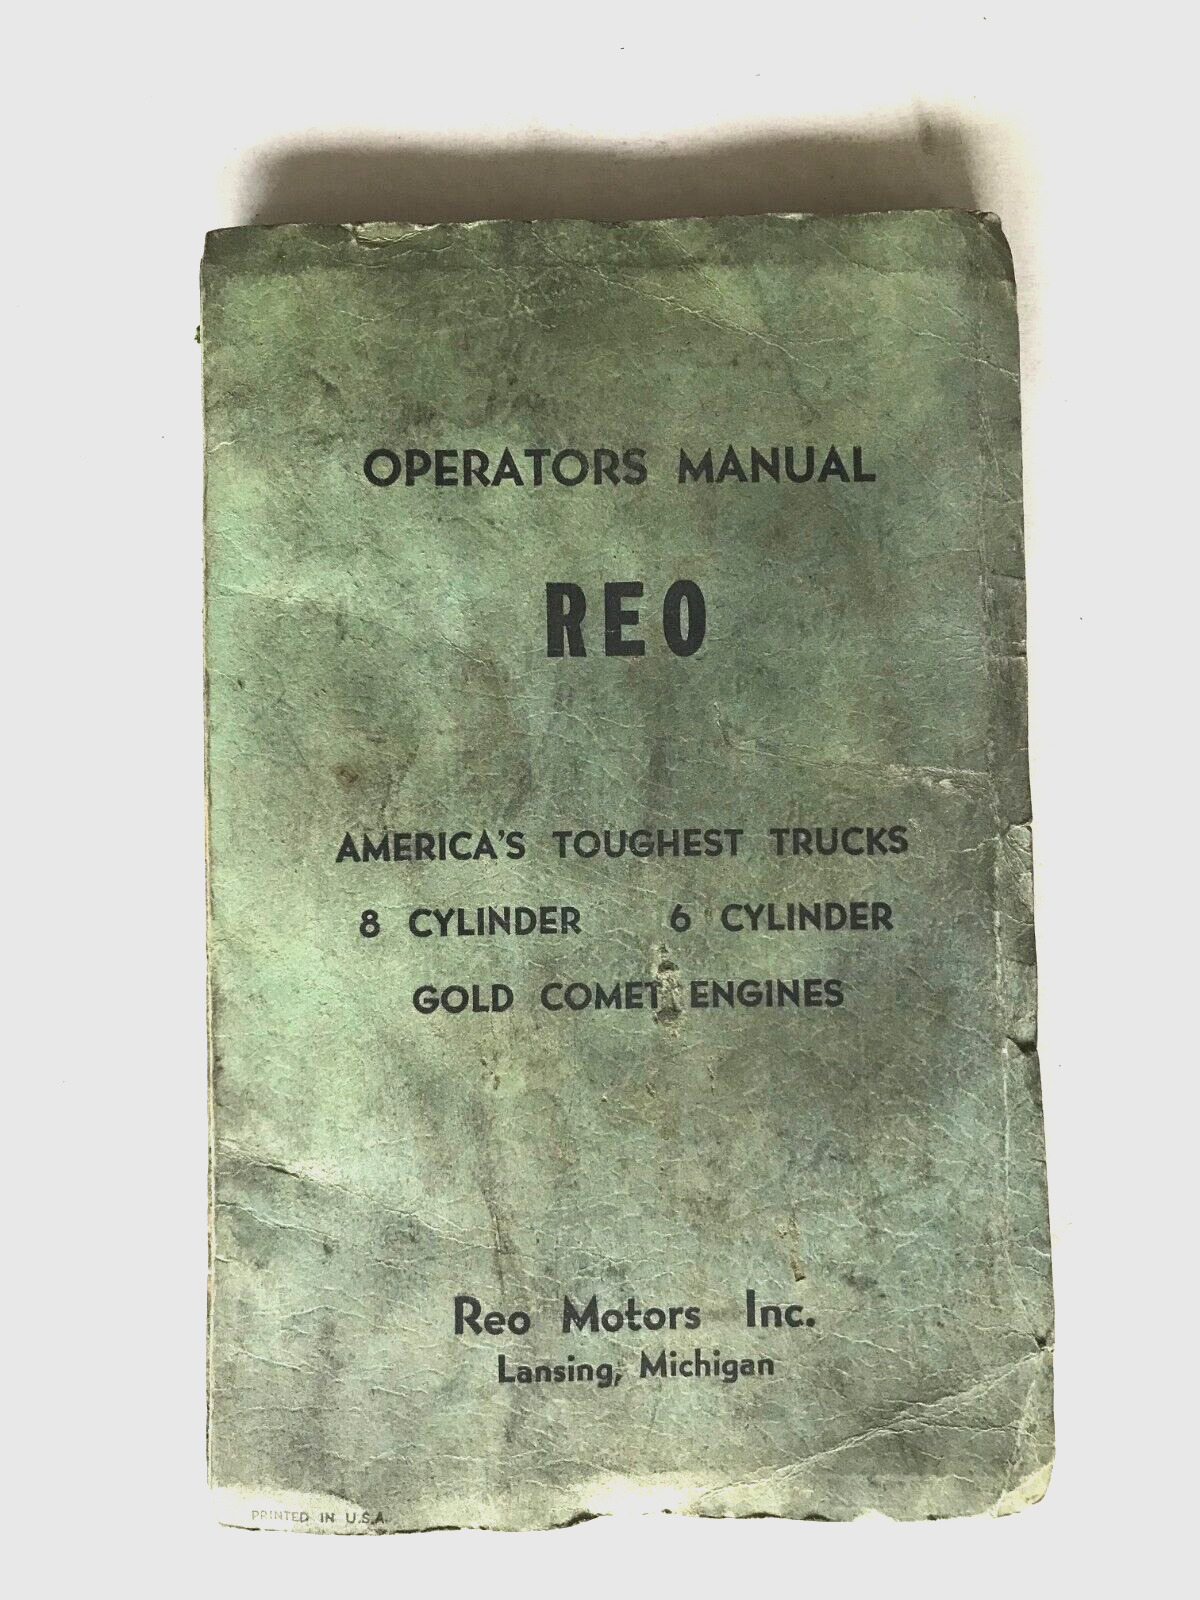 1930-40  REO TRUCKS OPERATOR's MANUAL 8 & 6 CYLINDER CAR AUTO MANUAL - 130 PAGES